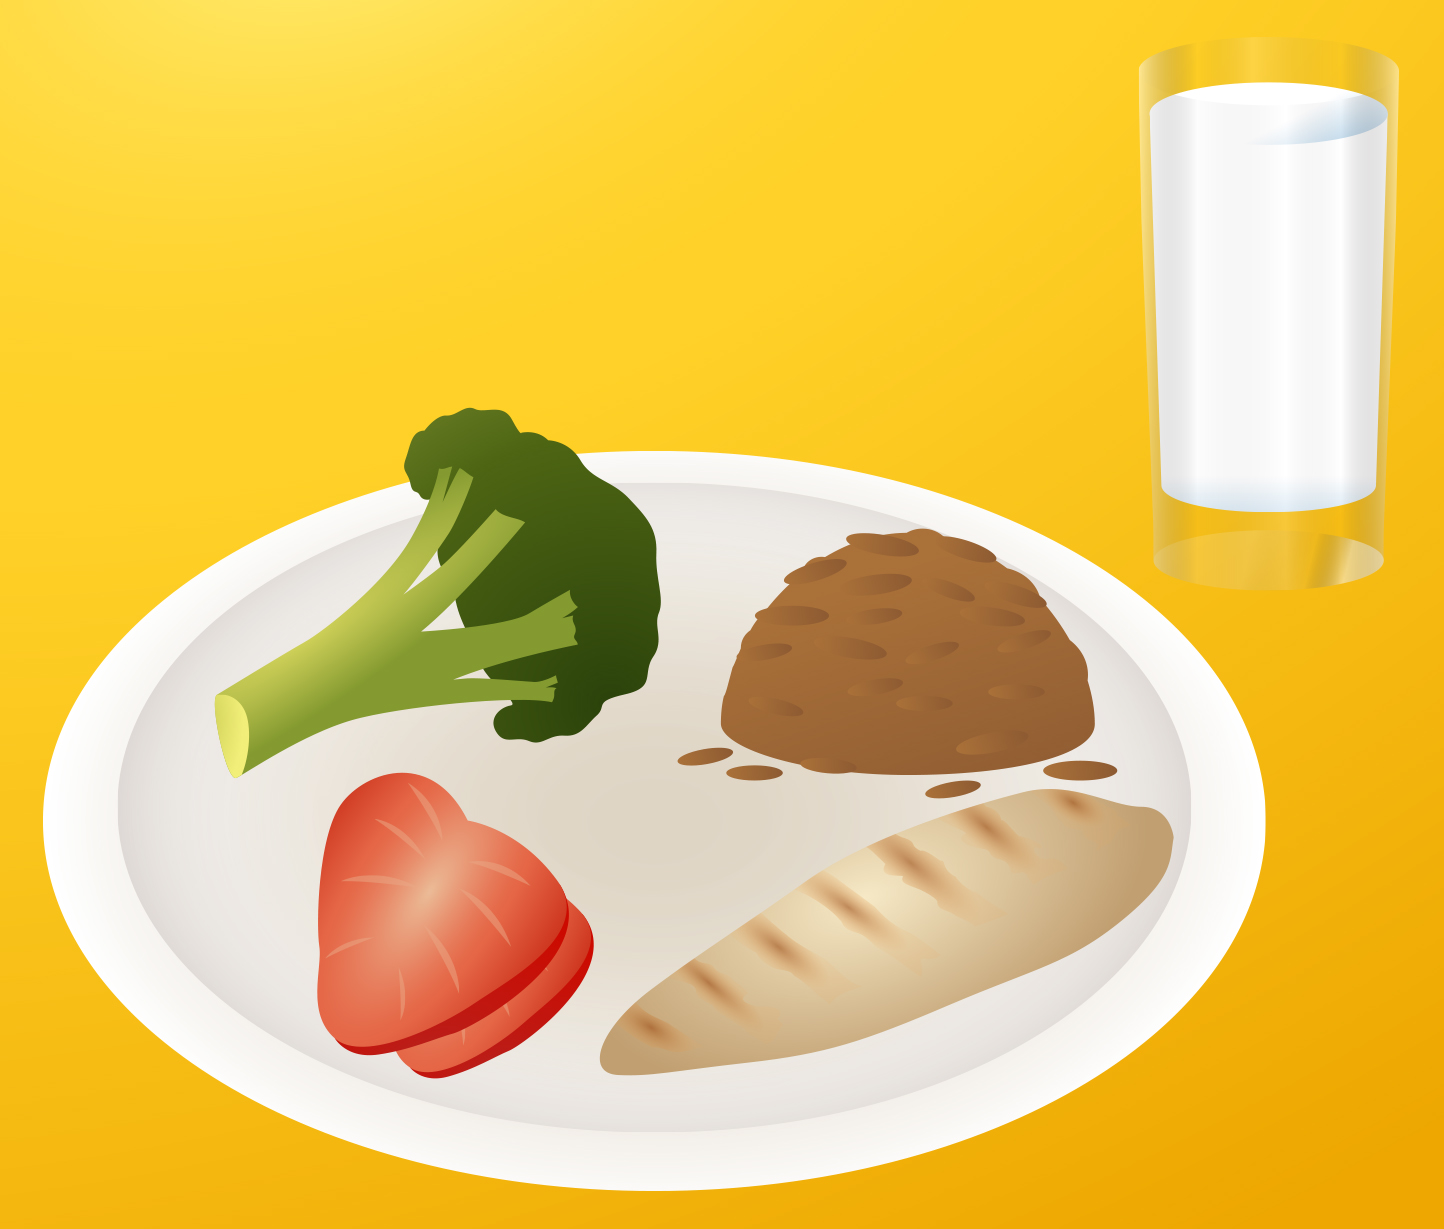     Healthy Plate Jpg Clipart   Free Nutrition And Healthy Food Clipart